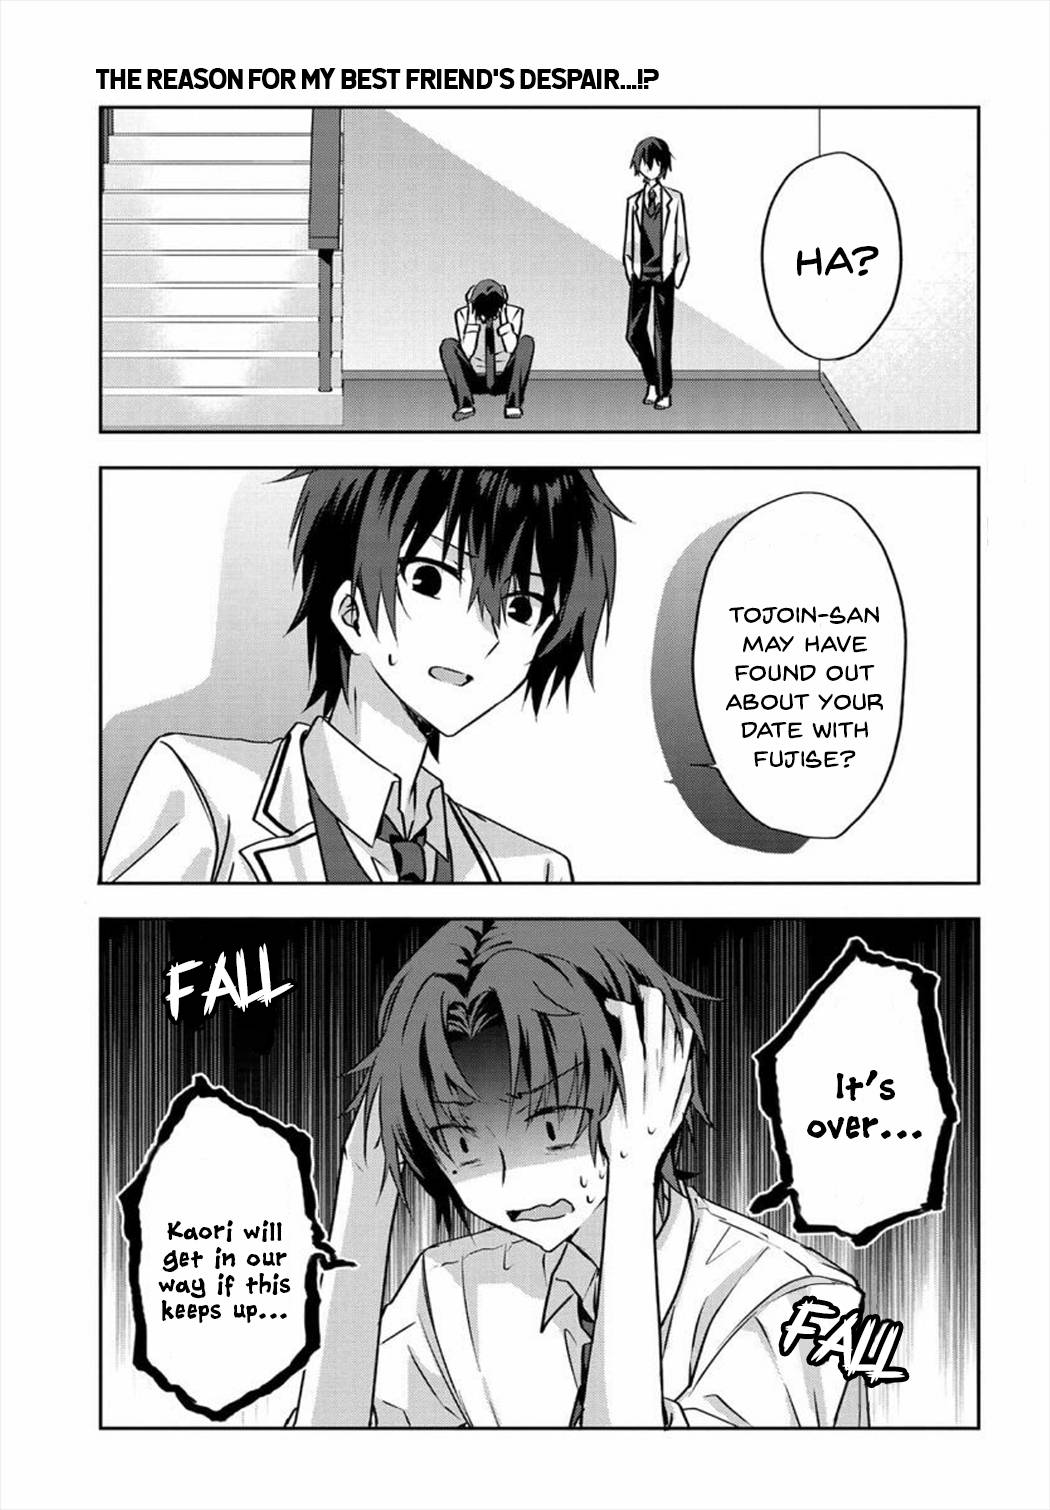 Since I’Ve Entered The World Of Romantic Comedy Manga, I’Ll Do My Best To Make The Losing Heroine Happy - chapter 3.1 - #1